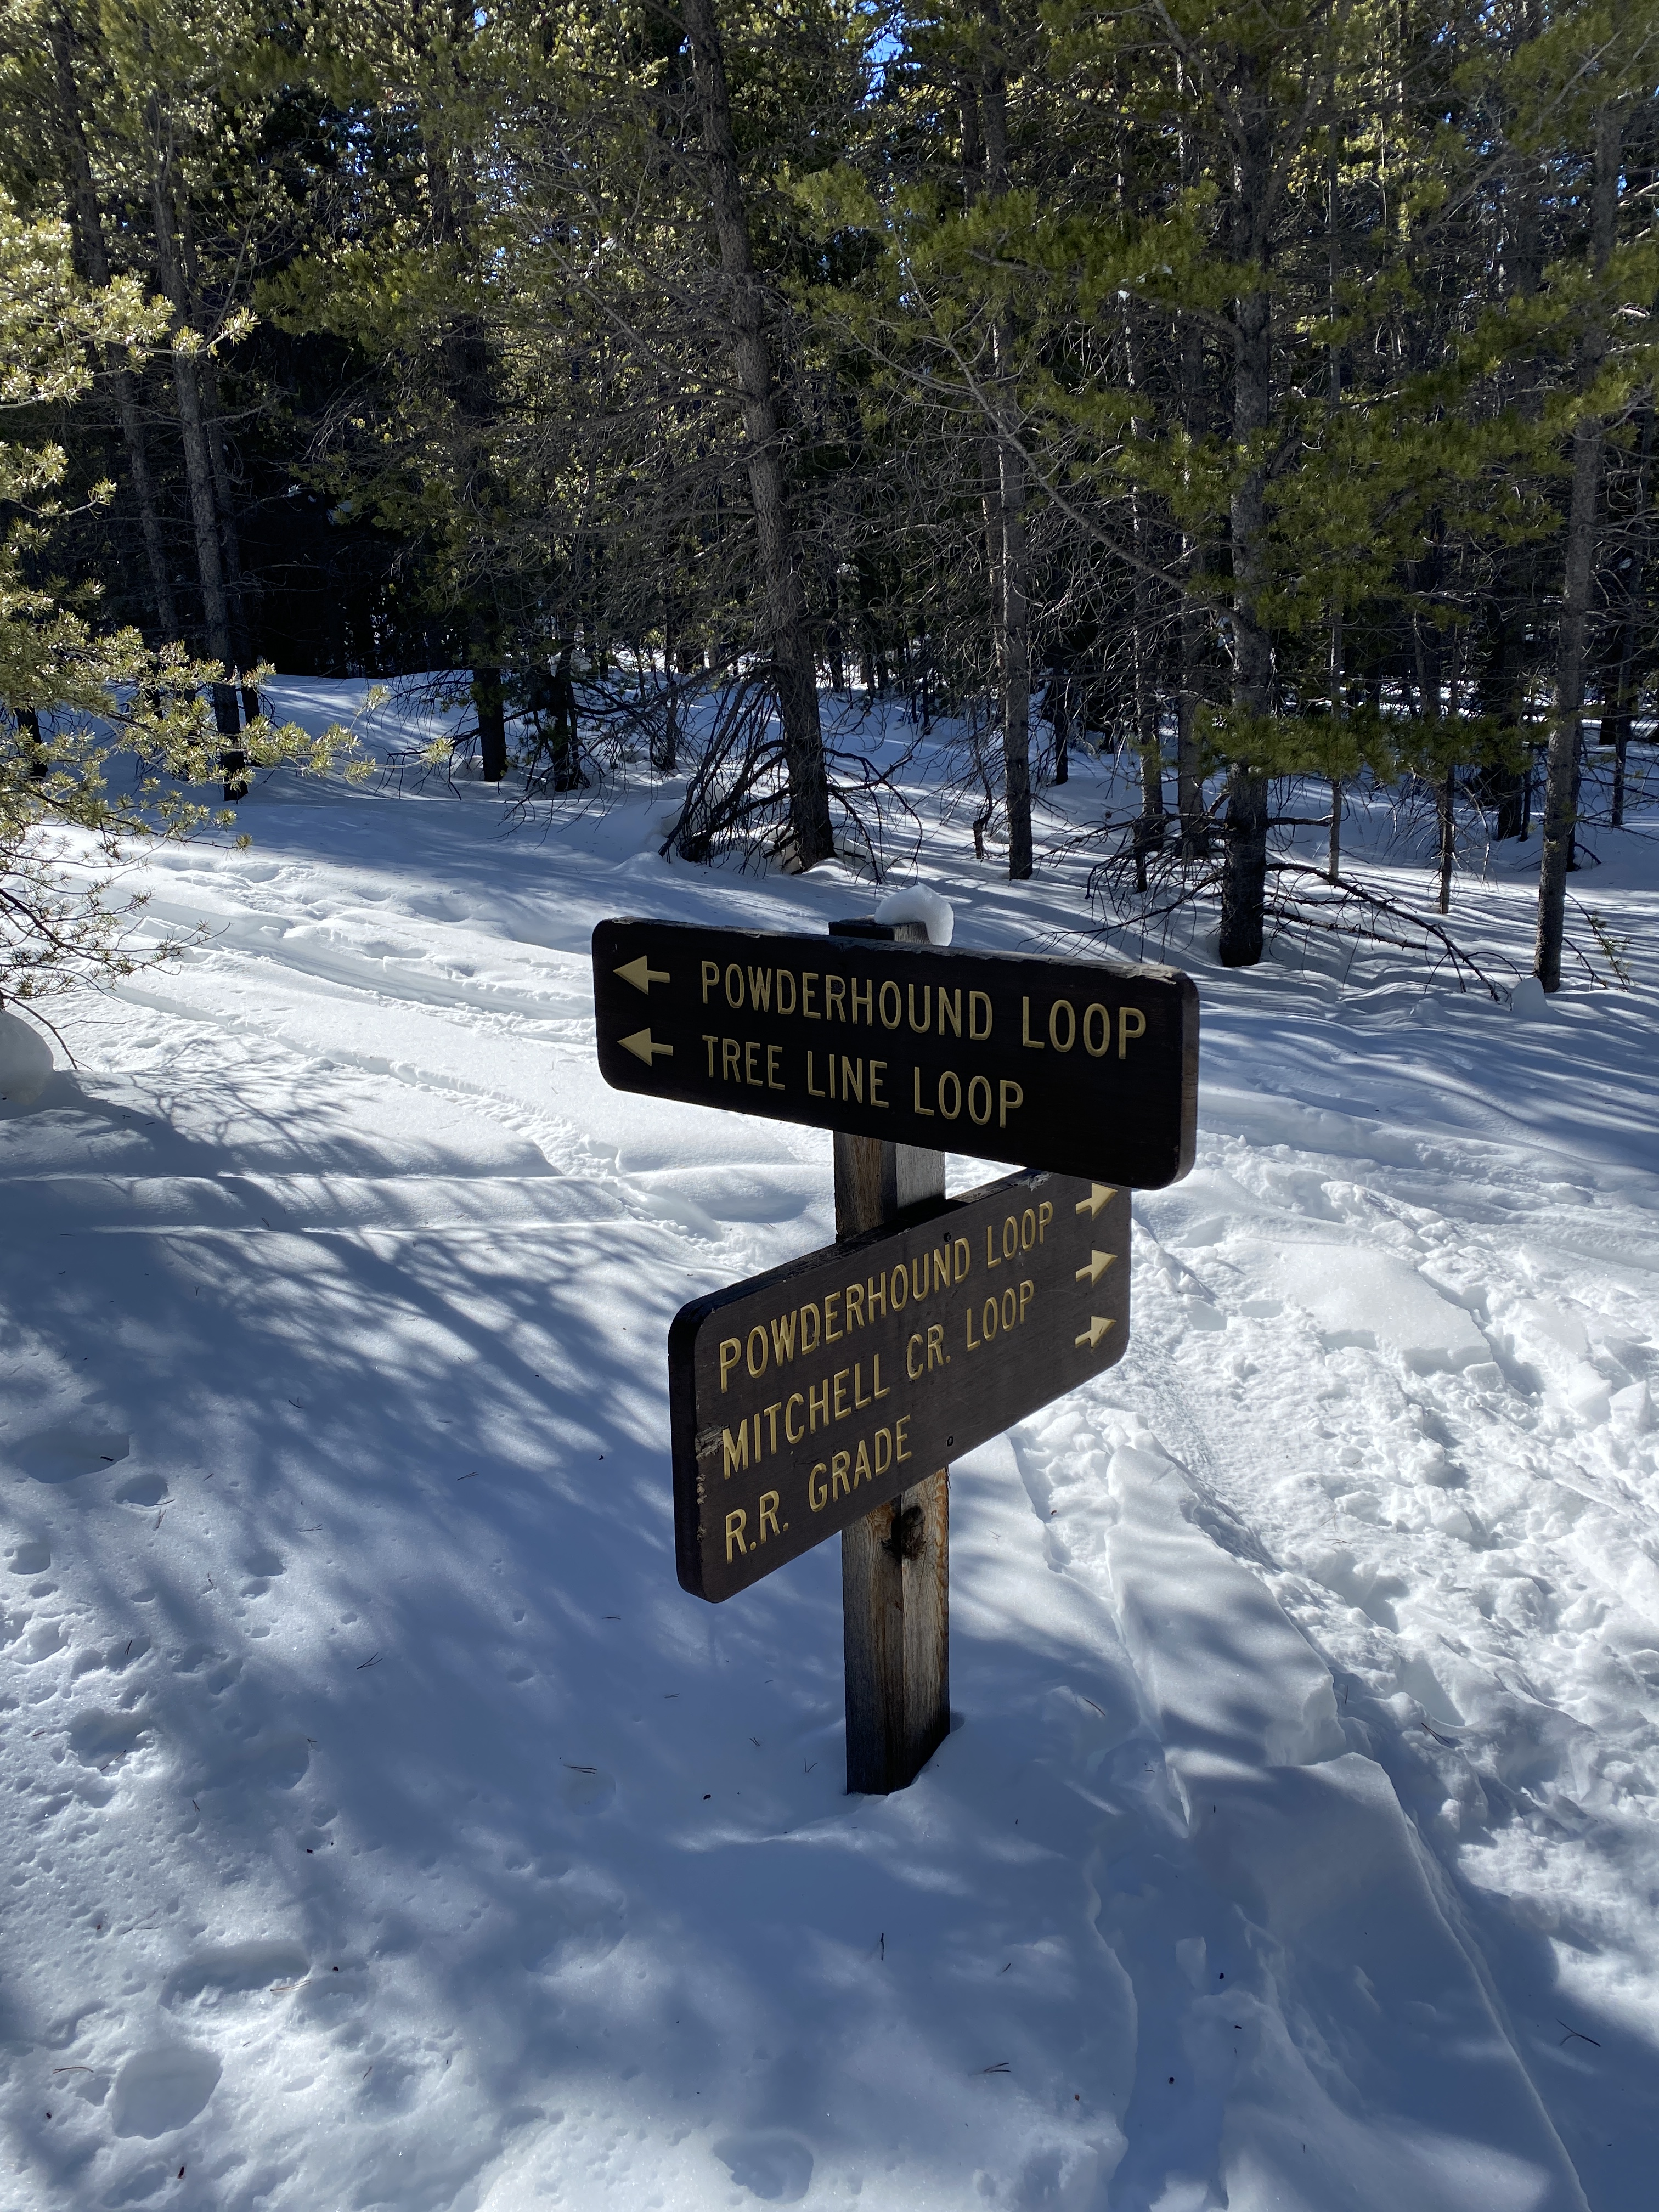 hiking signs in snow for Powderhound loop snowshoeing trail